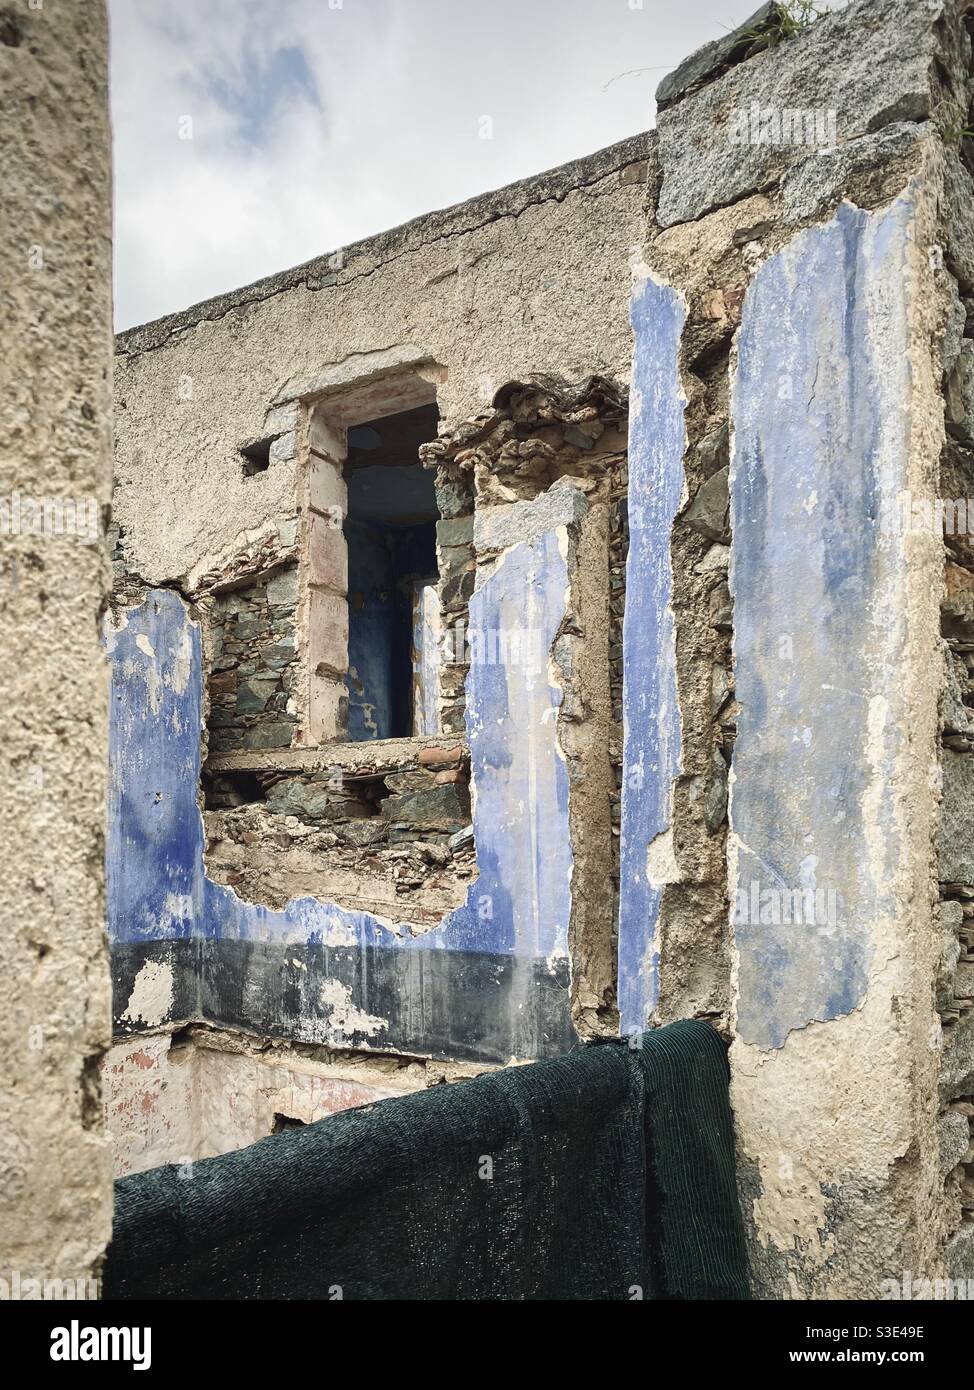 The old ruins of an abandoned and dismissed building in which the blue paint of the internal walls is still visible. Stock Photo